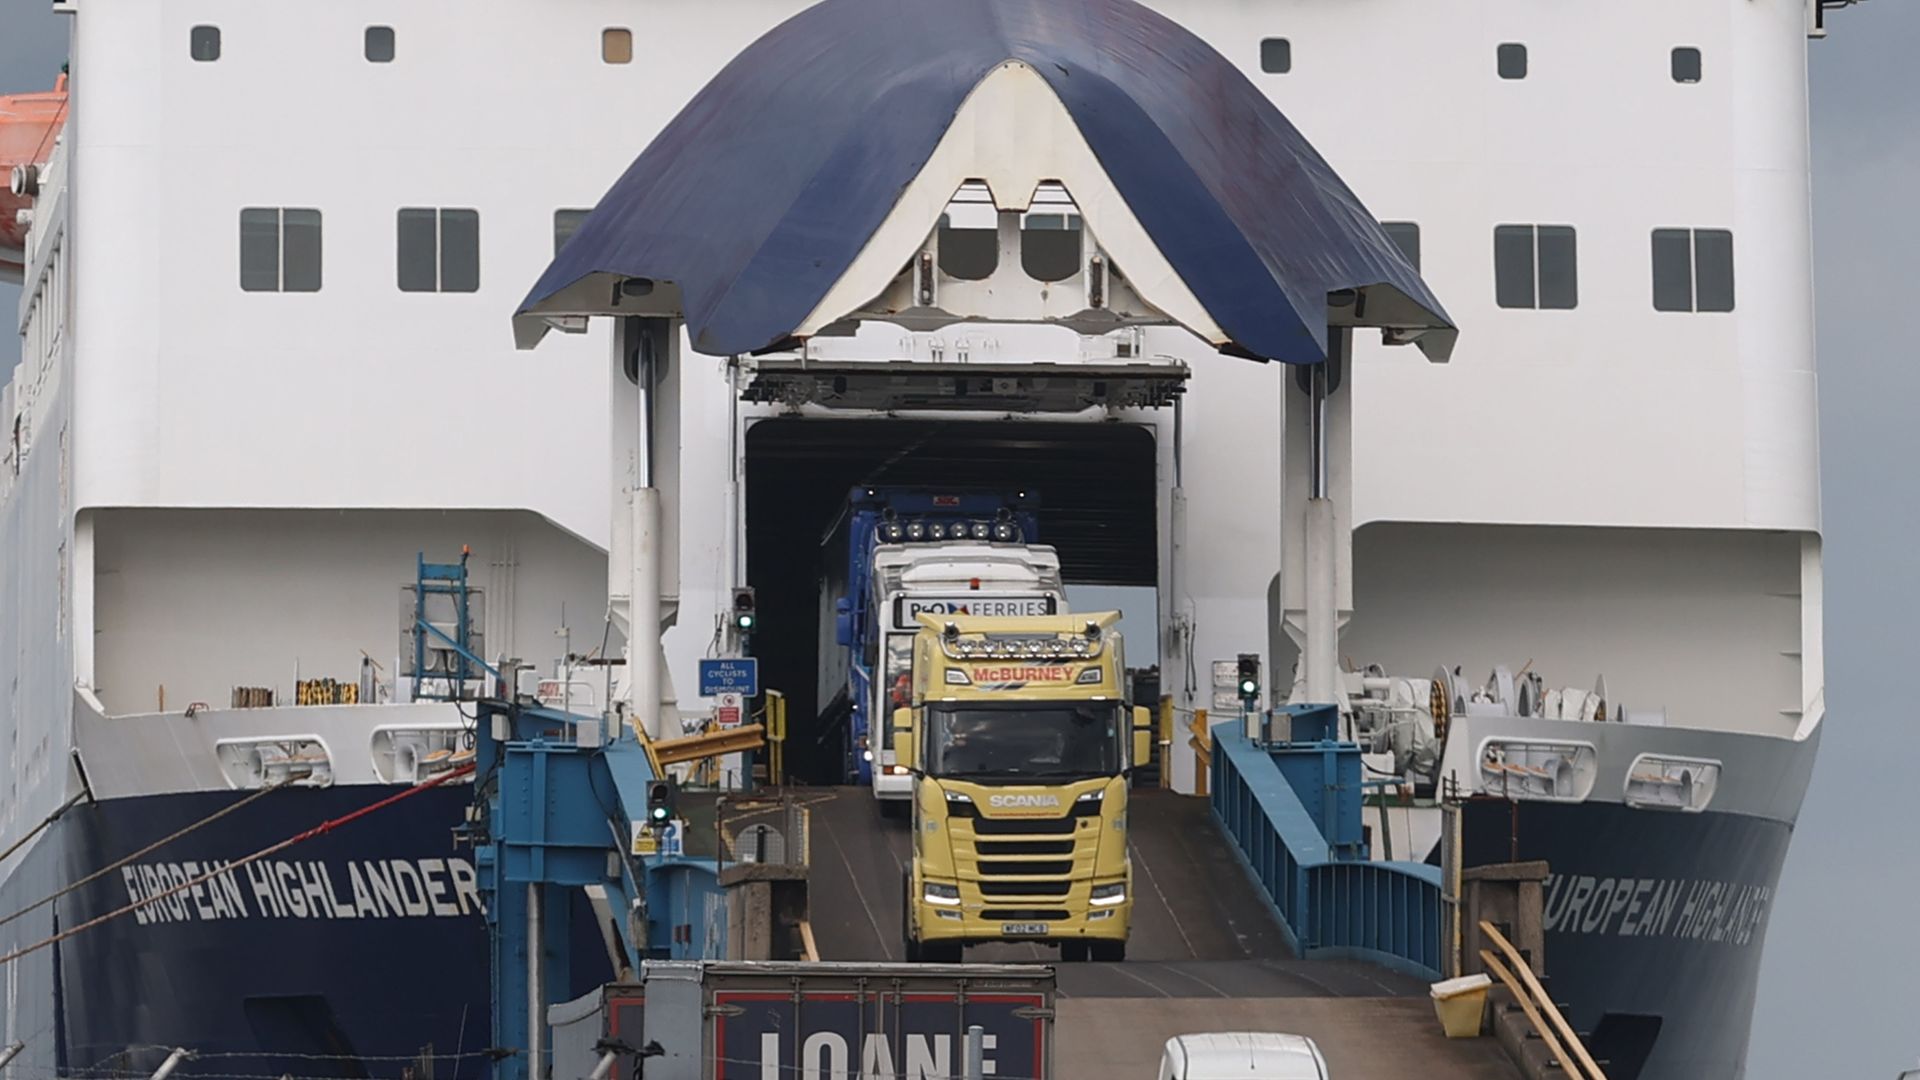 Lorries driving off the European Highlander P&O ferry at the Port of Larne, Northern Ireland - Credit: PA